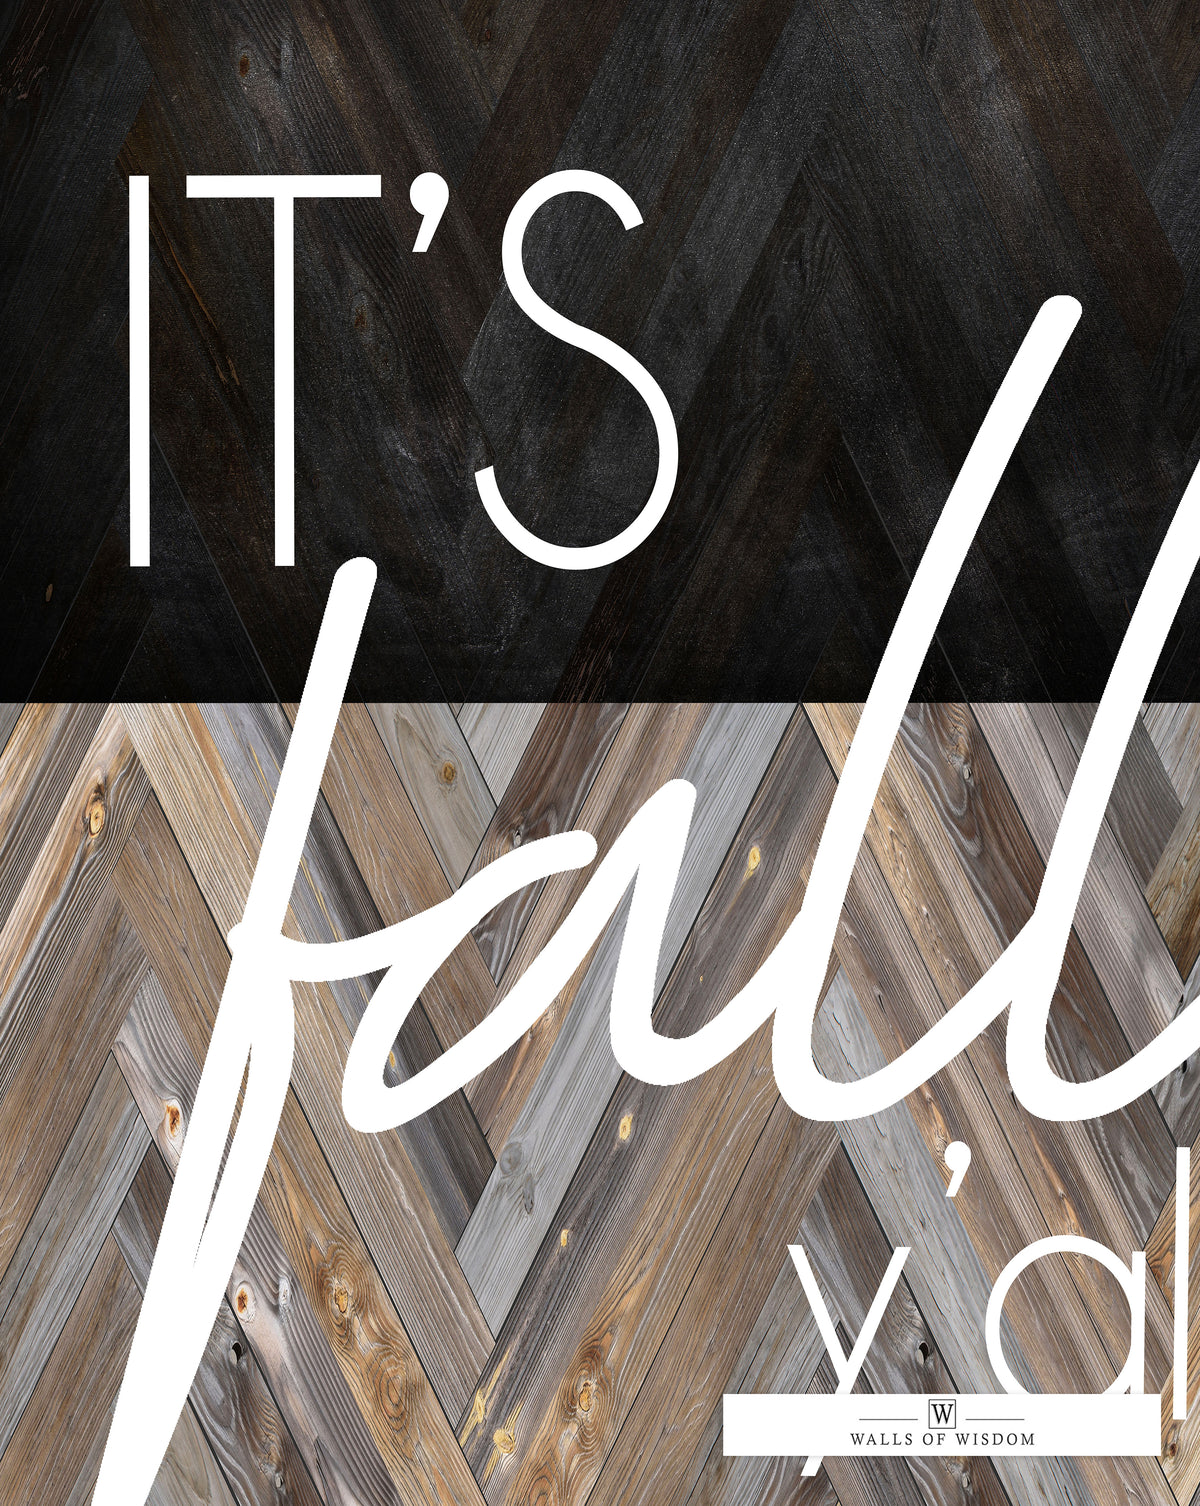 It's Fall Y'all Farmhouse Wall Decor - Vintage Fall Sign Poster Print